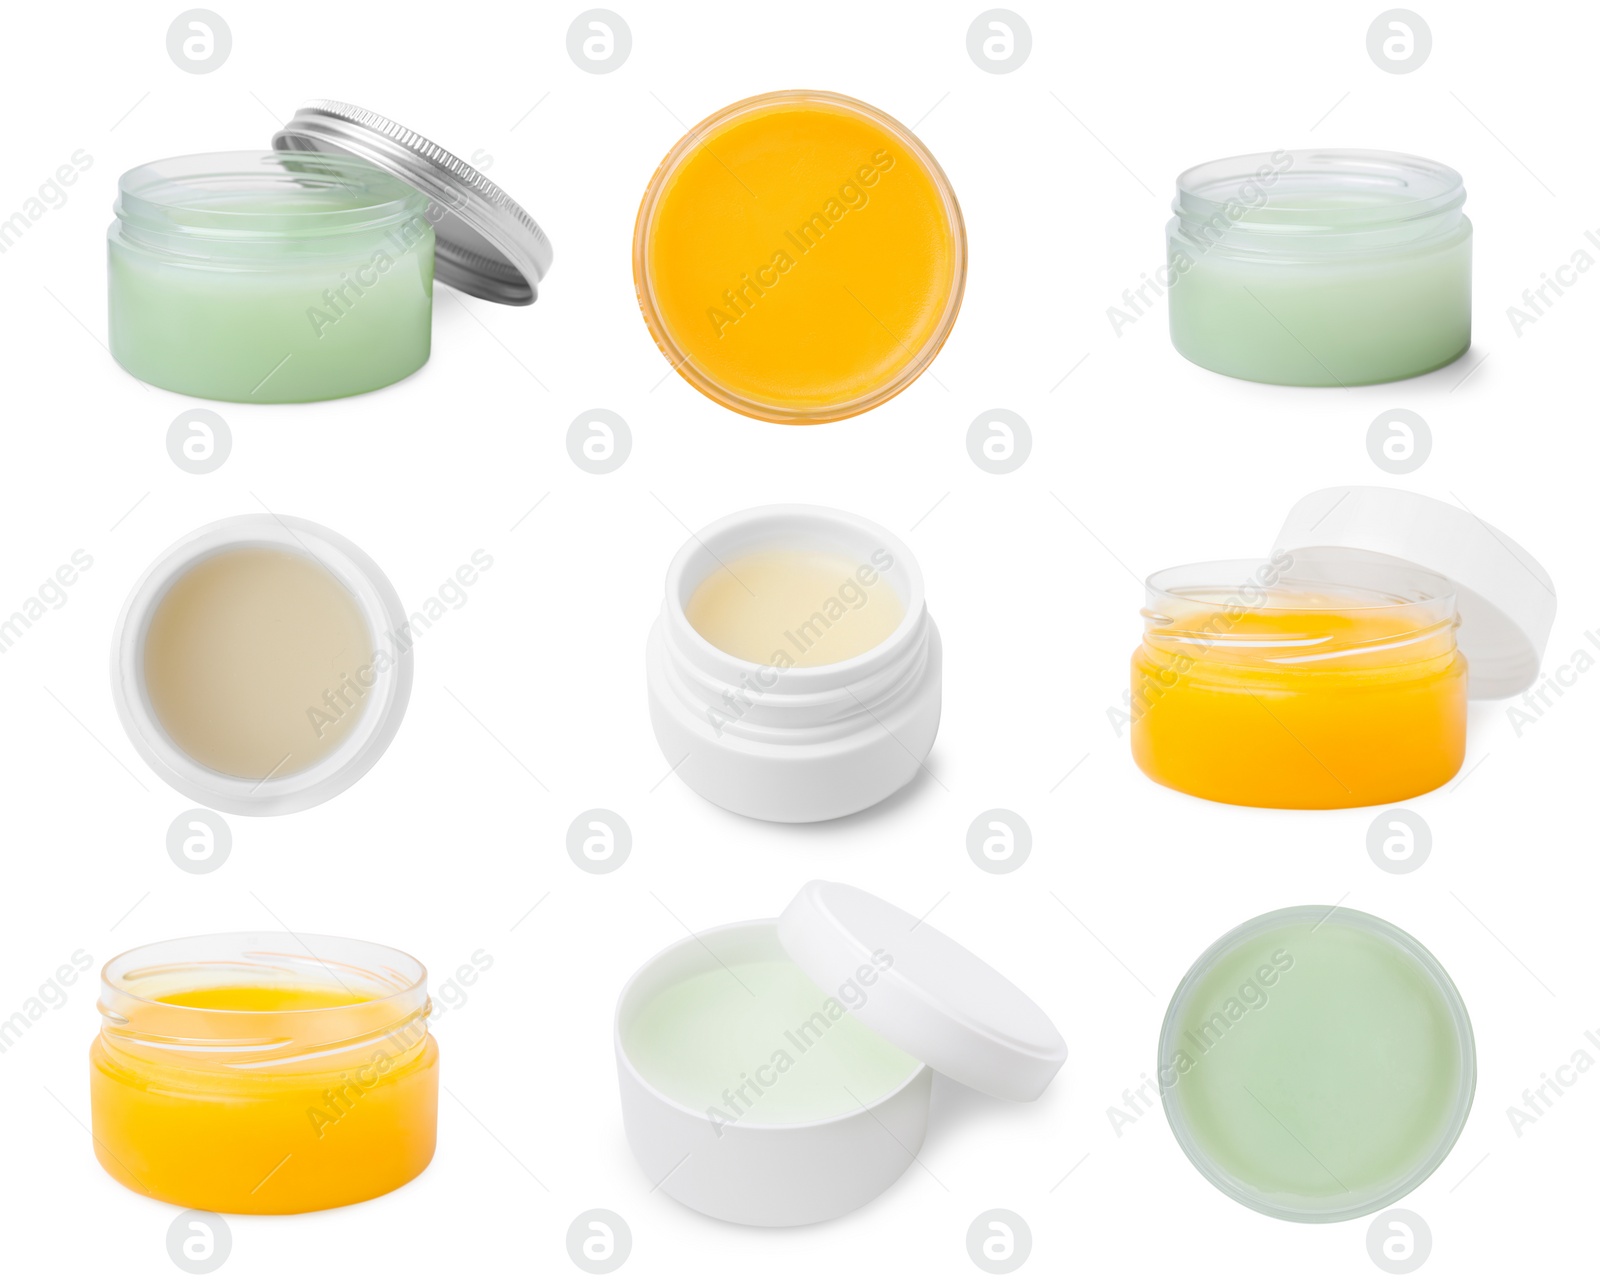 Image of Collage with different petroleum jellies in jars on white background. Cosmetic petrolatum